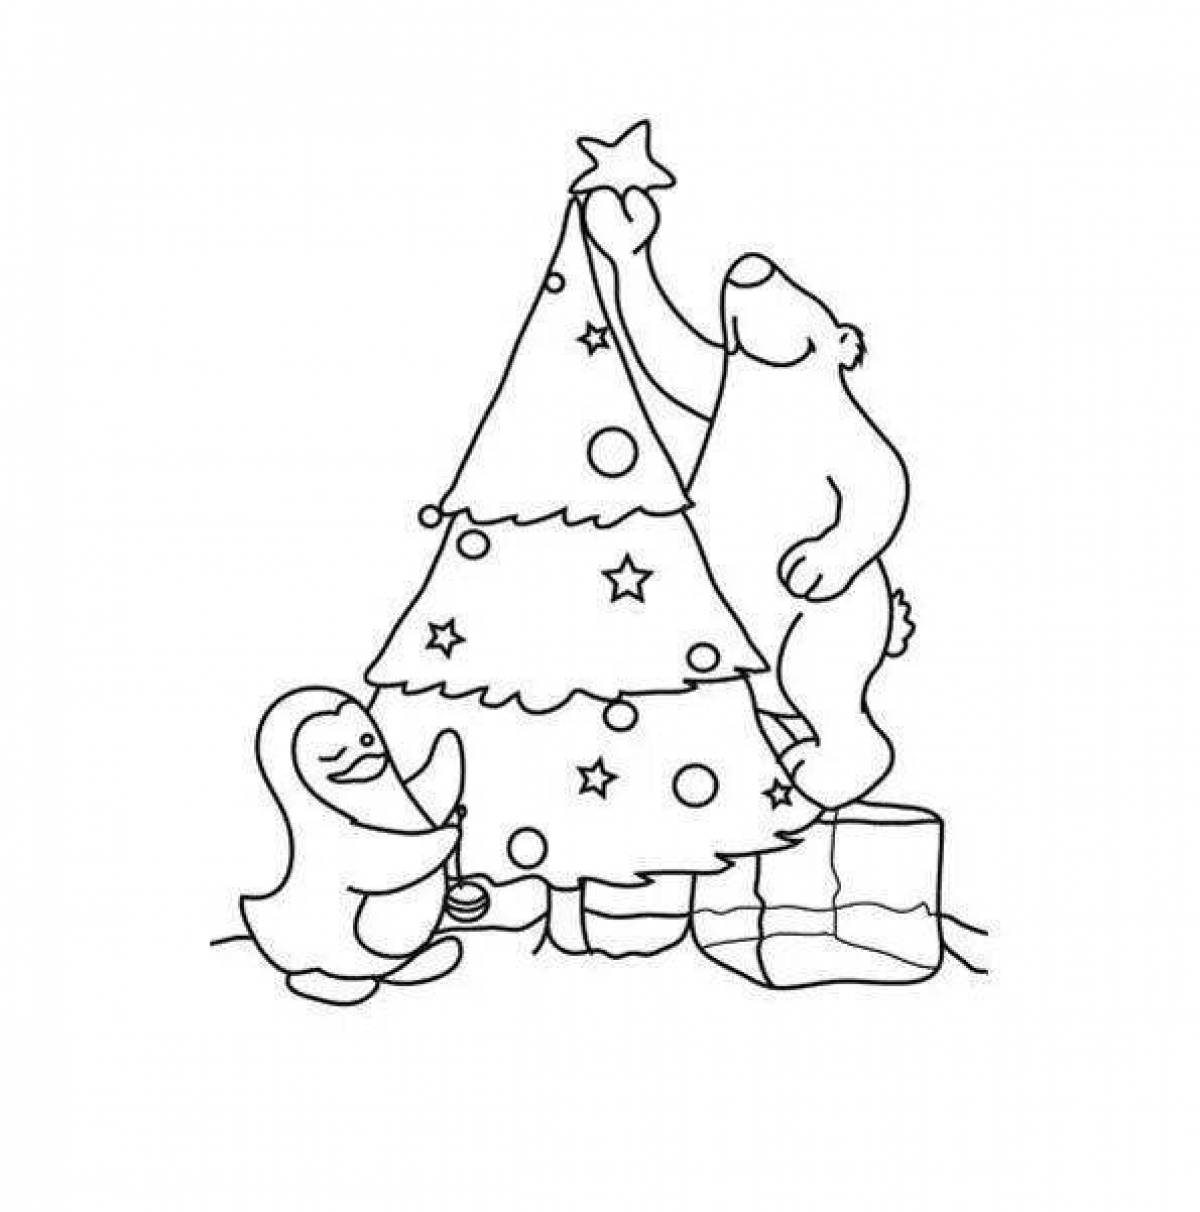 Playful Christmas tree with gifts